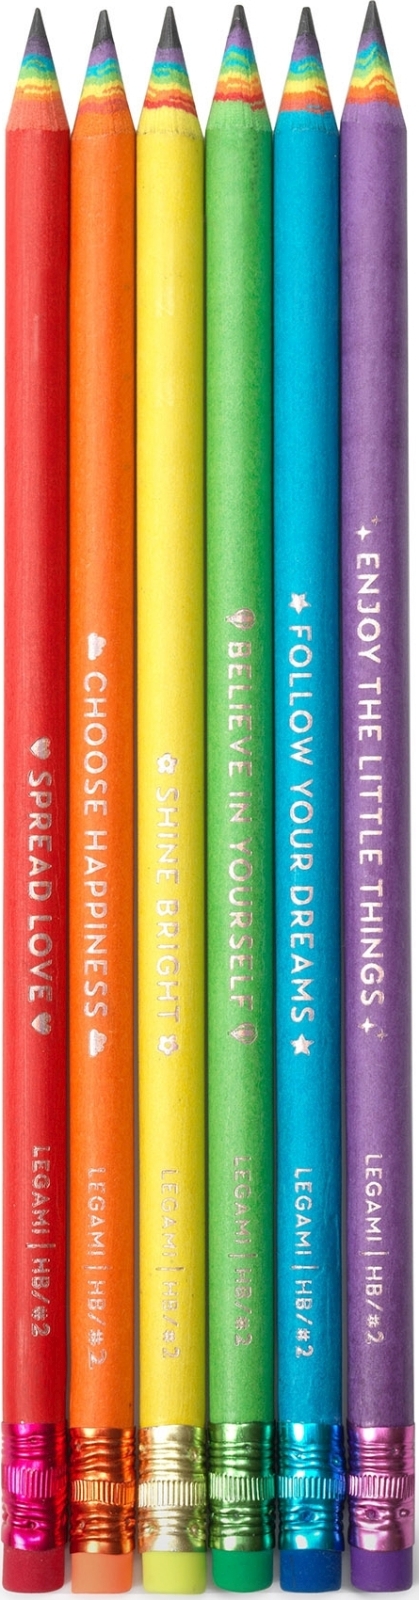 Levně Legami Happiness For Every Day - Set Of 6 Hb Graphite
Pencils